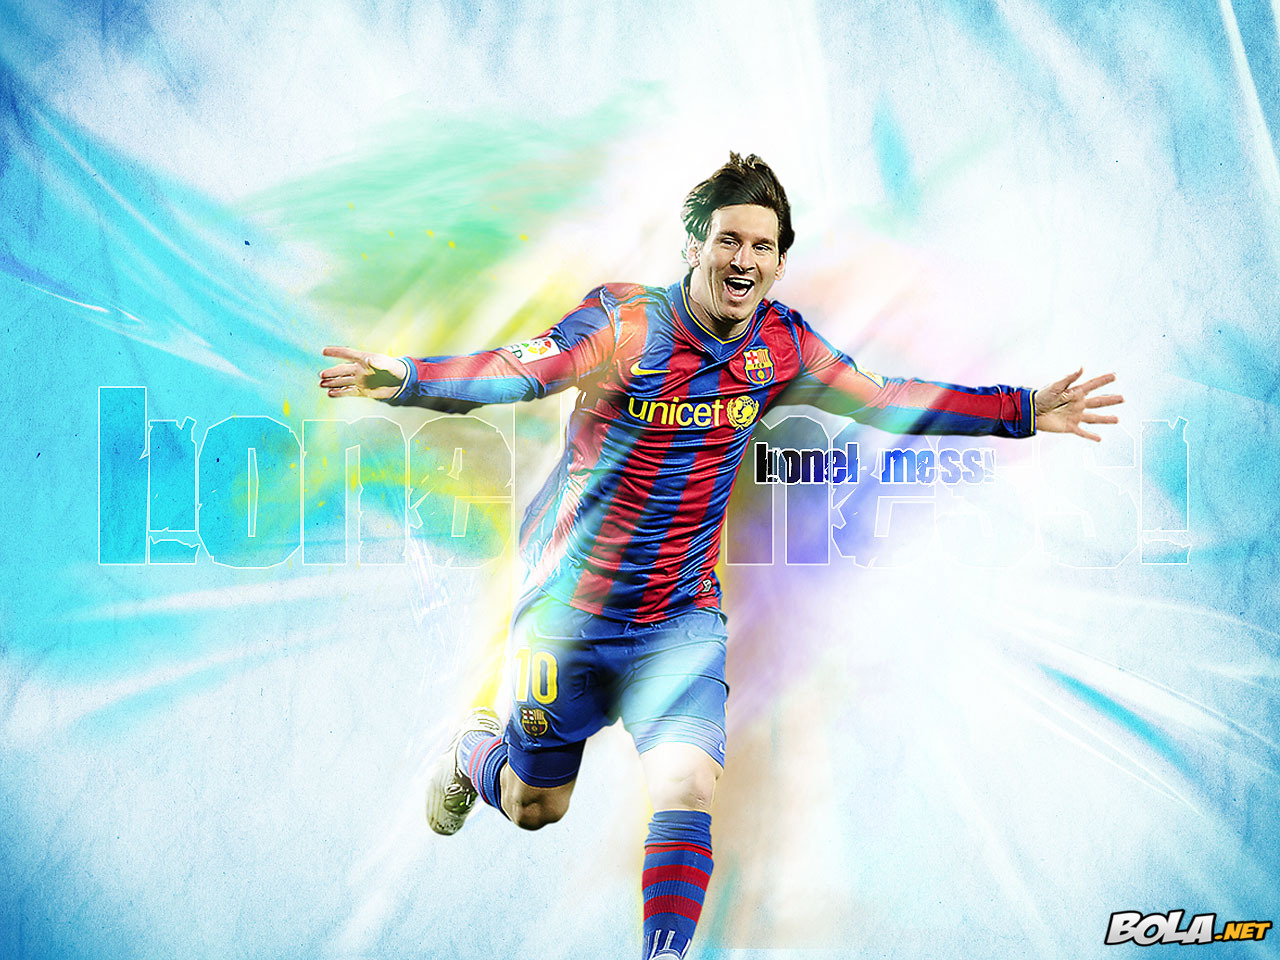  lionel messi. wallpapers of lionel messi 